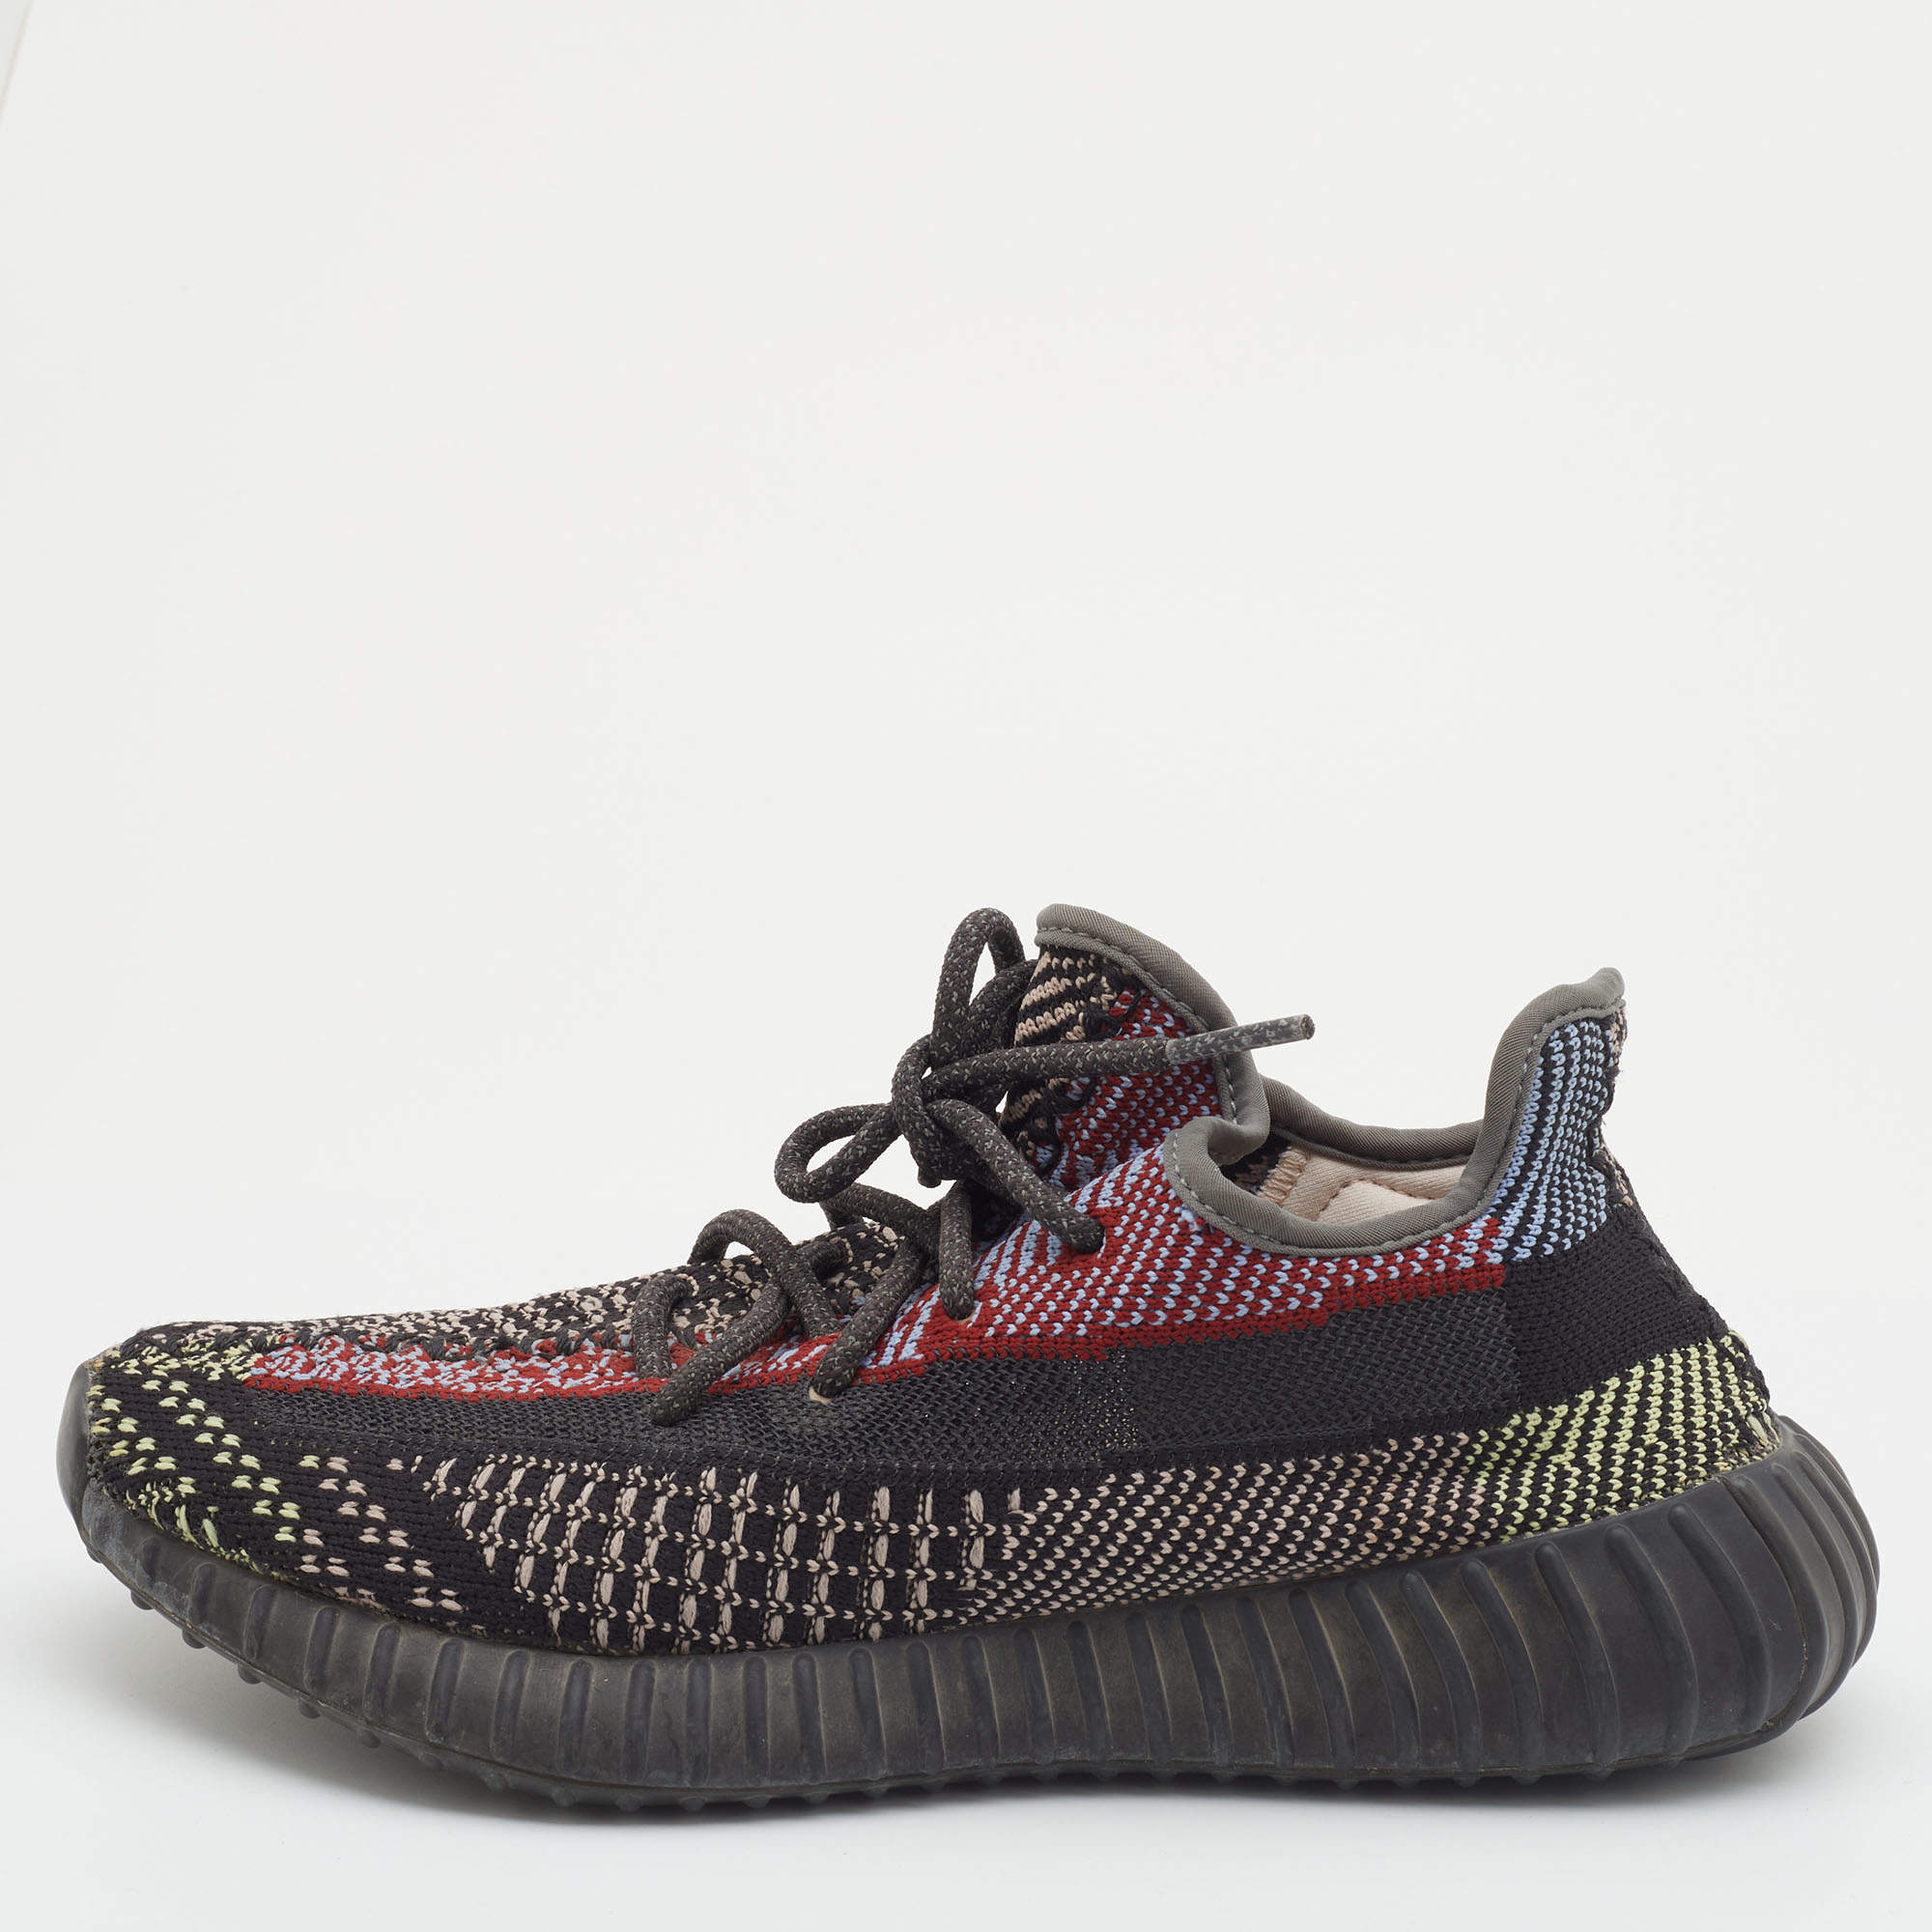 Adidas Yeezy Boost Black Knit Fabric 350 V2 (Non-Reflective) Sneakers Size 2/3 Adidas | TLC